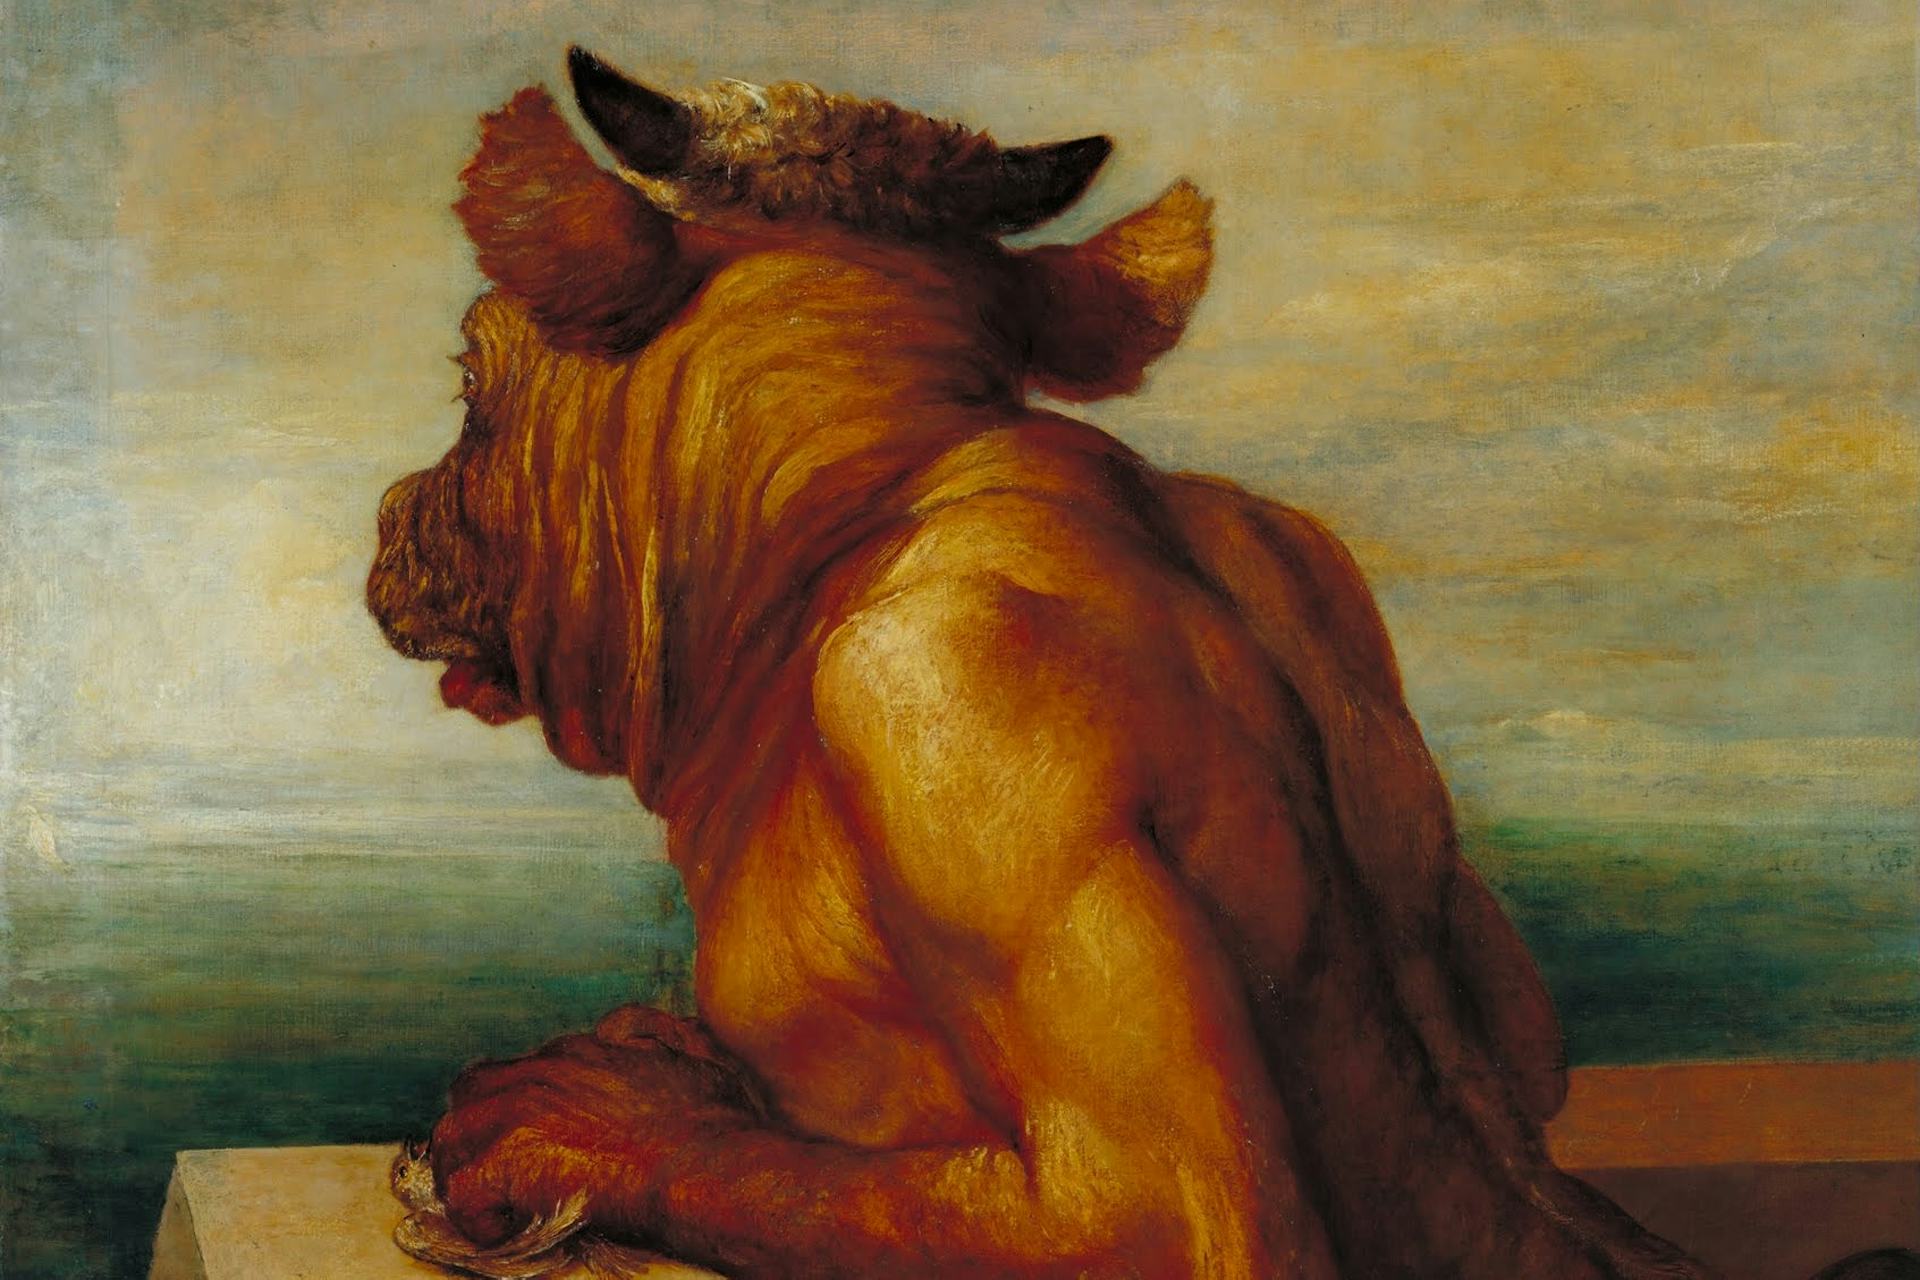 The Minotaur by George Frederic Watts (1885)